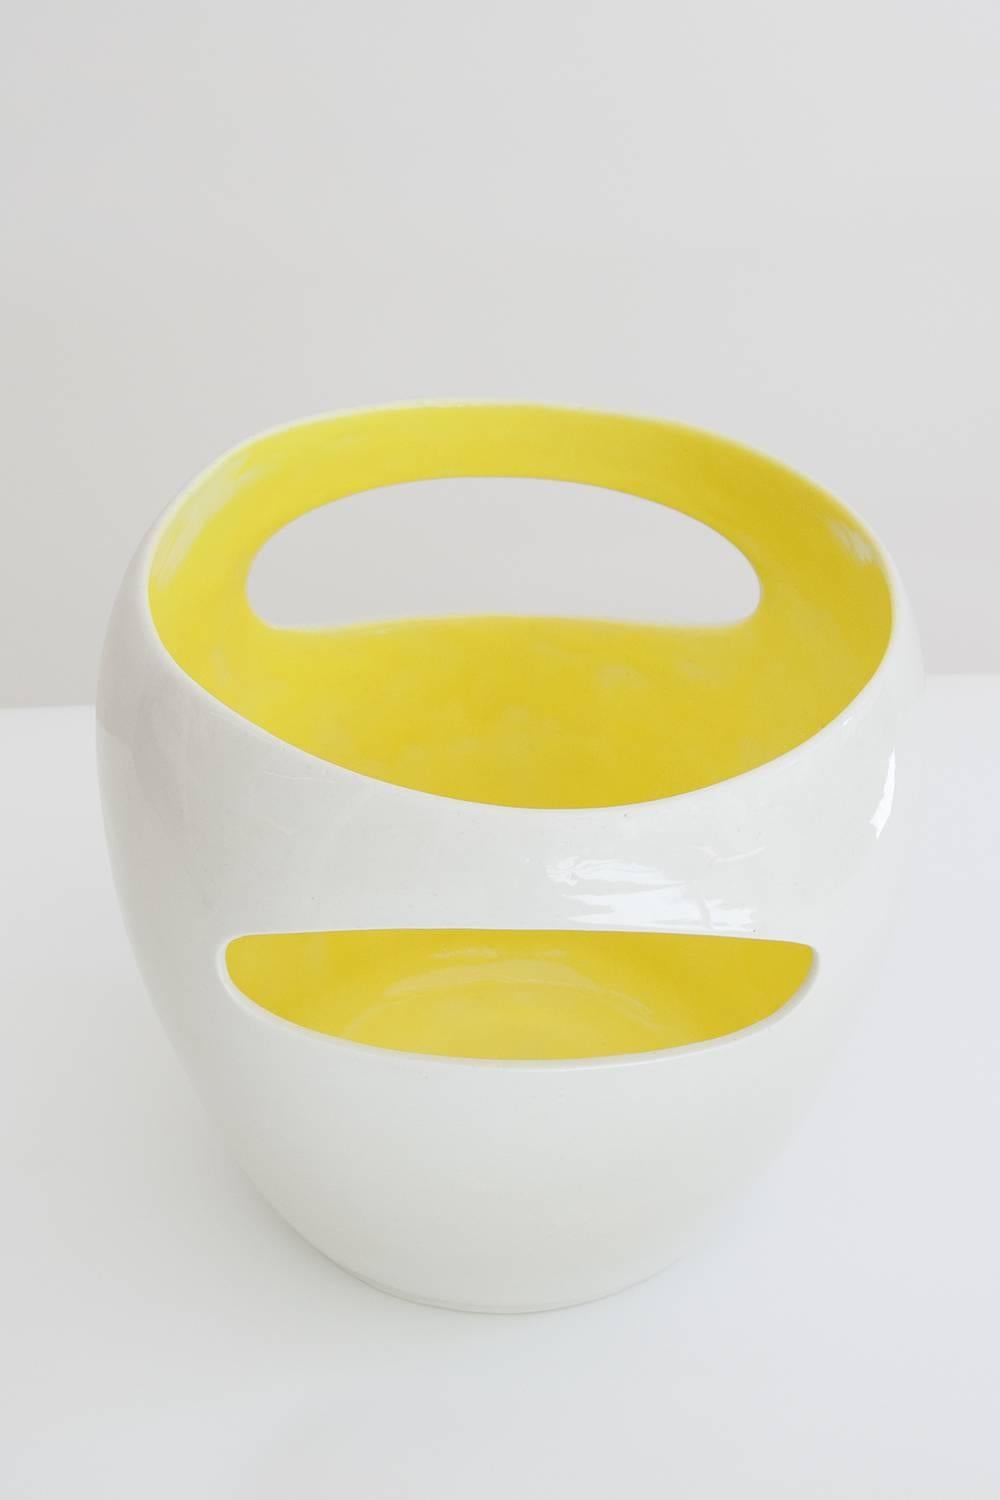 Schwyz, Porcelain Vase with Bright Yellow Enameled Interior by Philippe Cramer For Sale 1